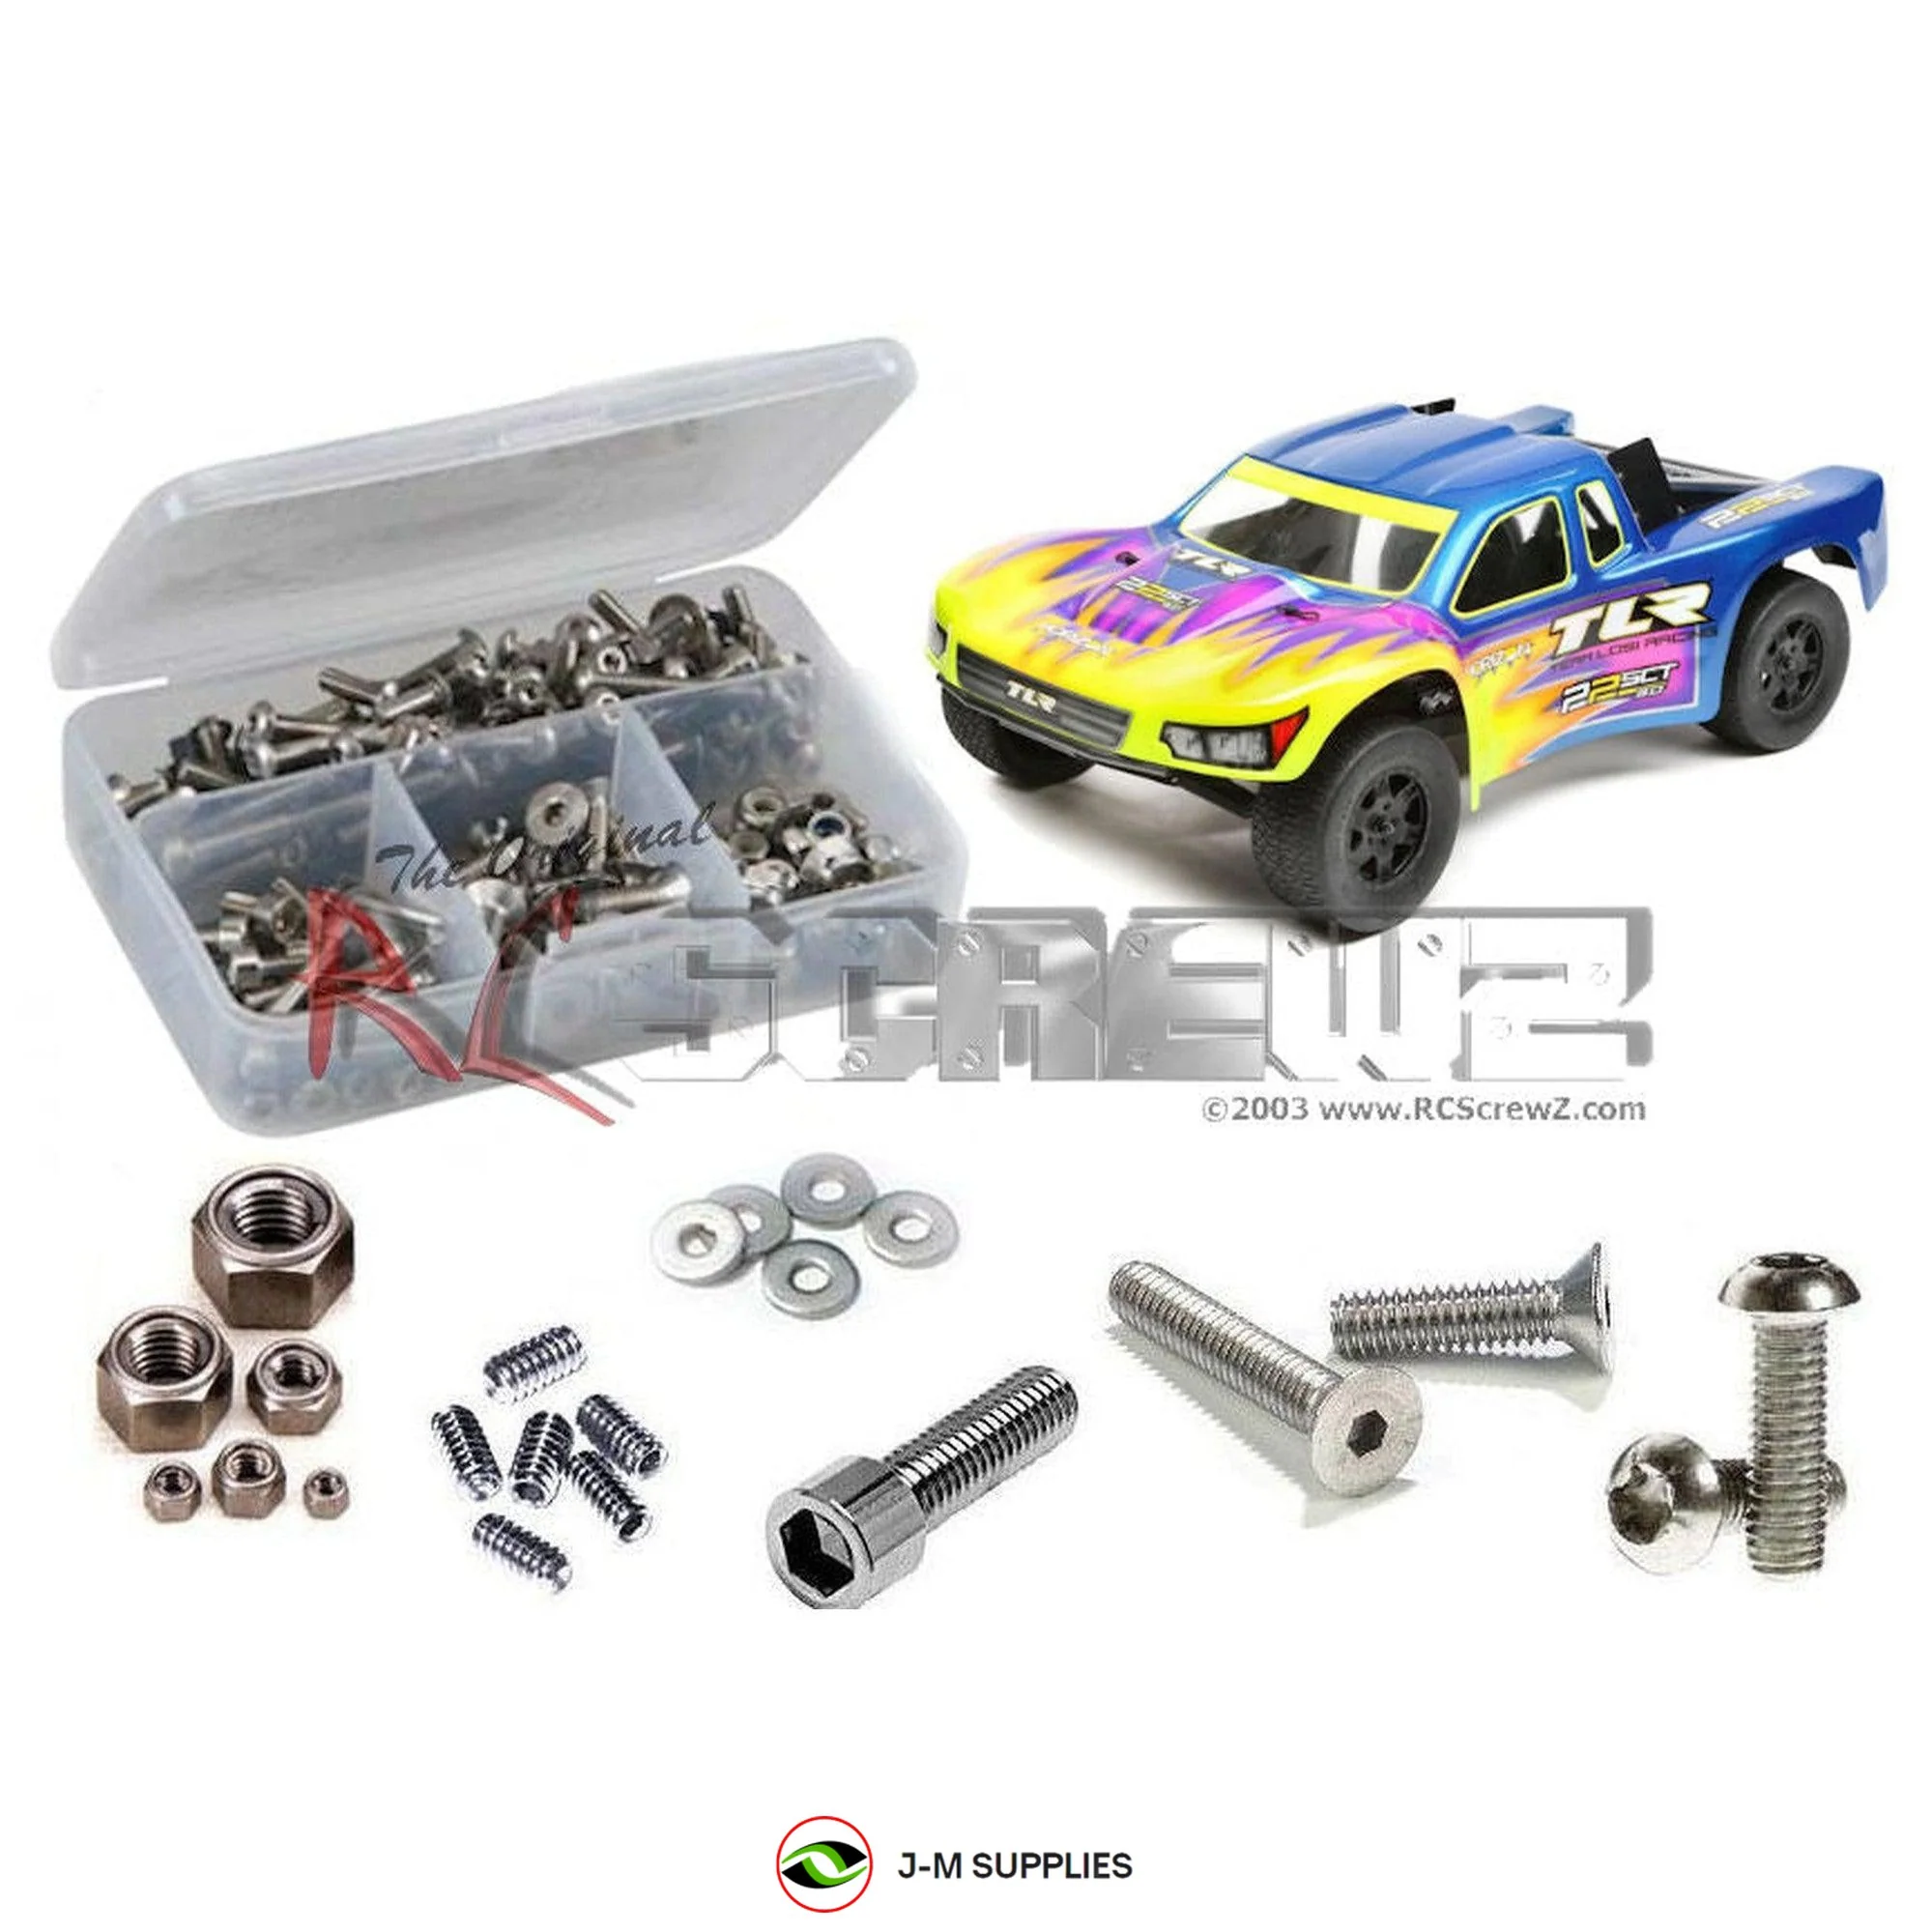 RCScrewZ Stainless Screw Kit los099 for Team Losi 22 SCT 1/10 3.0 2wd #TLR03009 - Picture 1 of 12